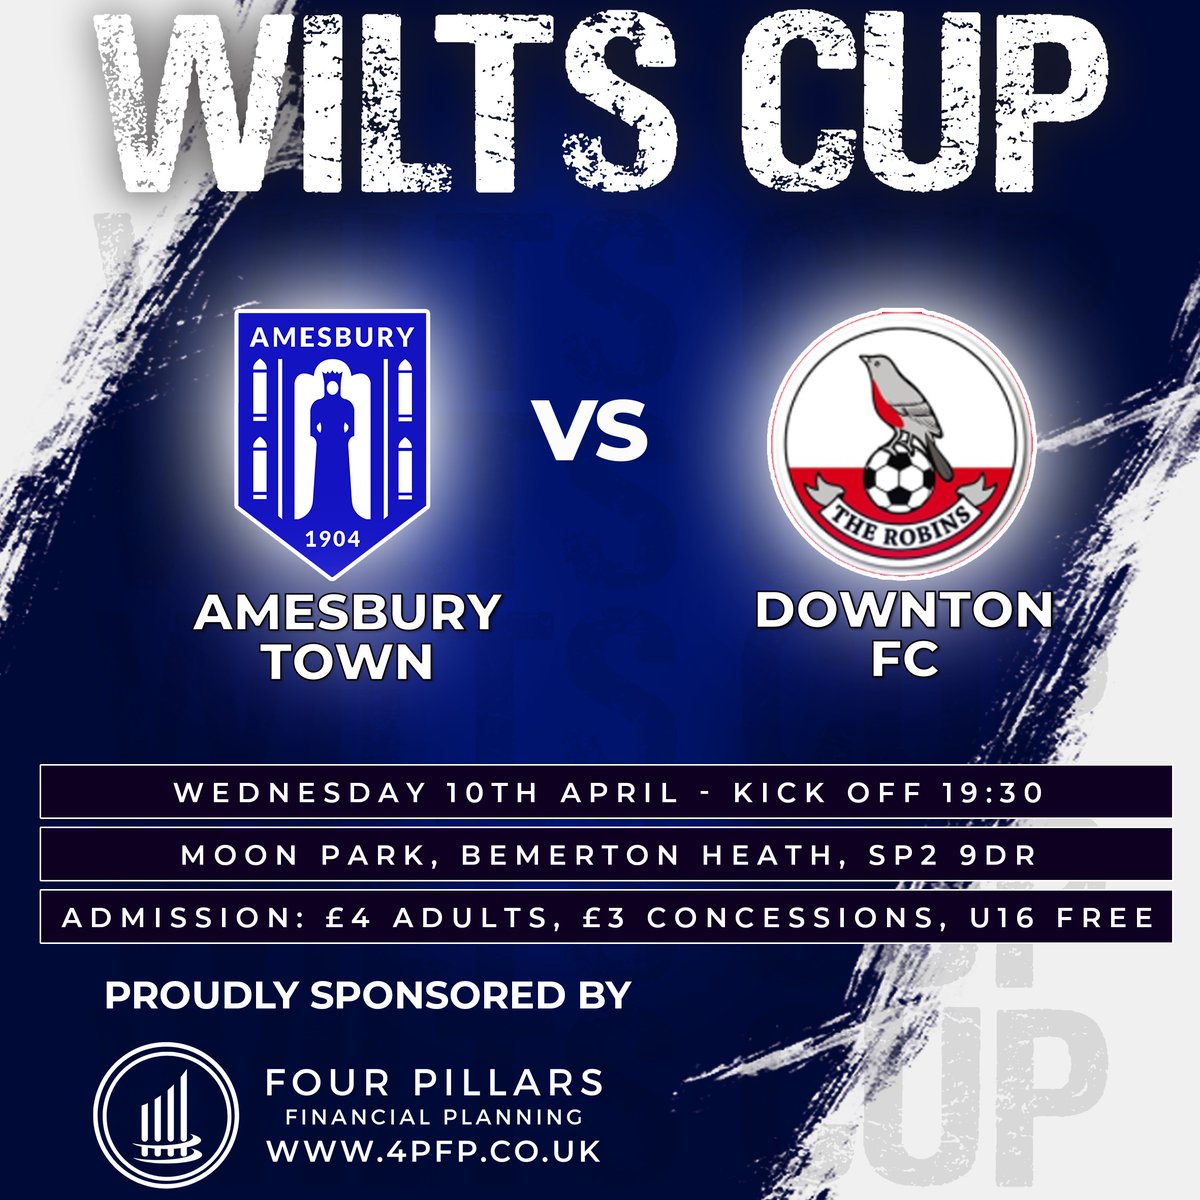 𝗡𝗘𝗫𝗧 𝗨𝗣 TONIGHT its the Wiltshire Senior Cup Final at Moon Park Come & support the lads as we face a tough test against Downton of the @WessexLeague 🆚@DowntonFC 🏆@WiltshireFA 📌Moon Park SP2 9DR 🧭bit.ly/Bemmy ⏰19:30 💵Adults £5 / OAP £3 / 16 & Under Free